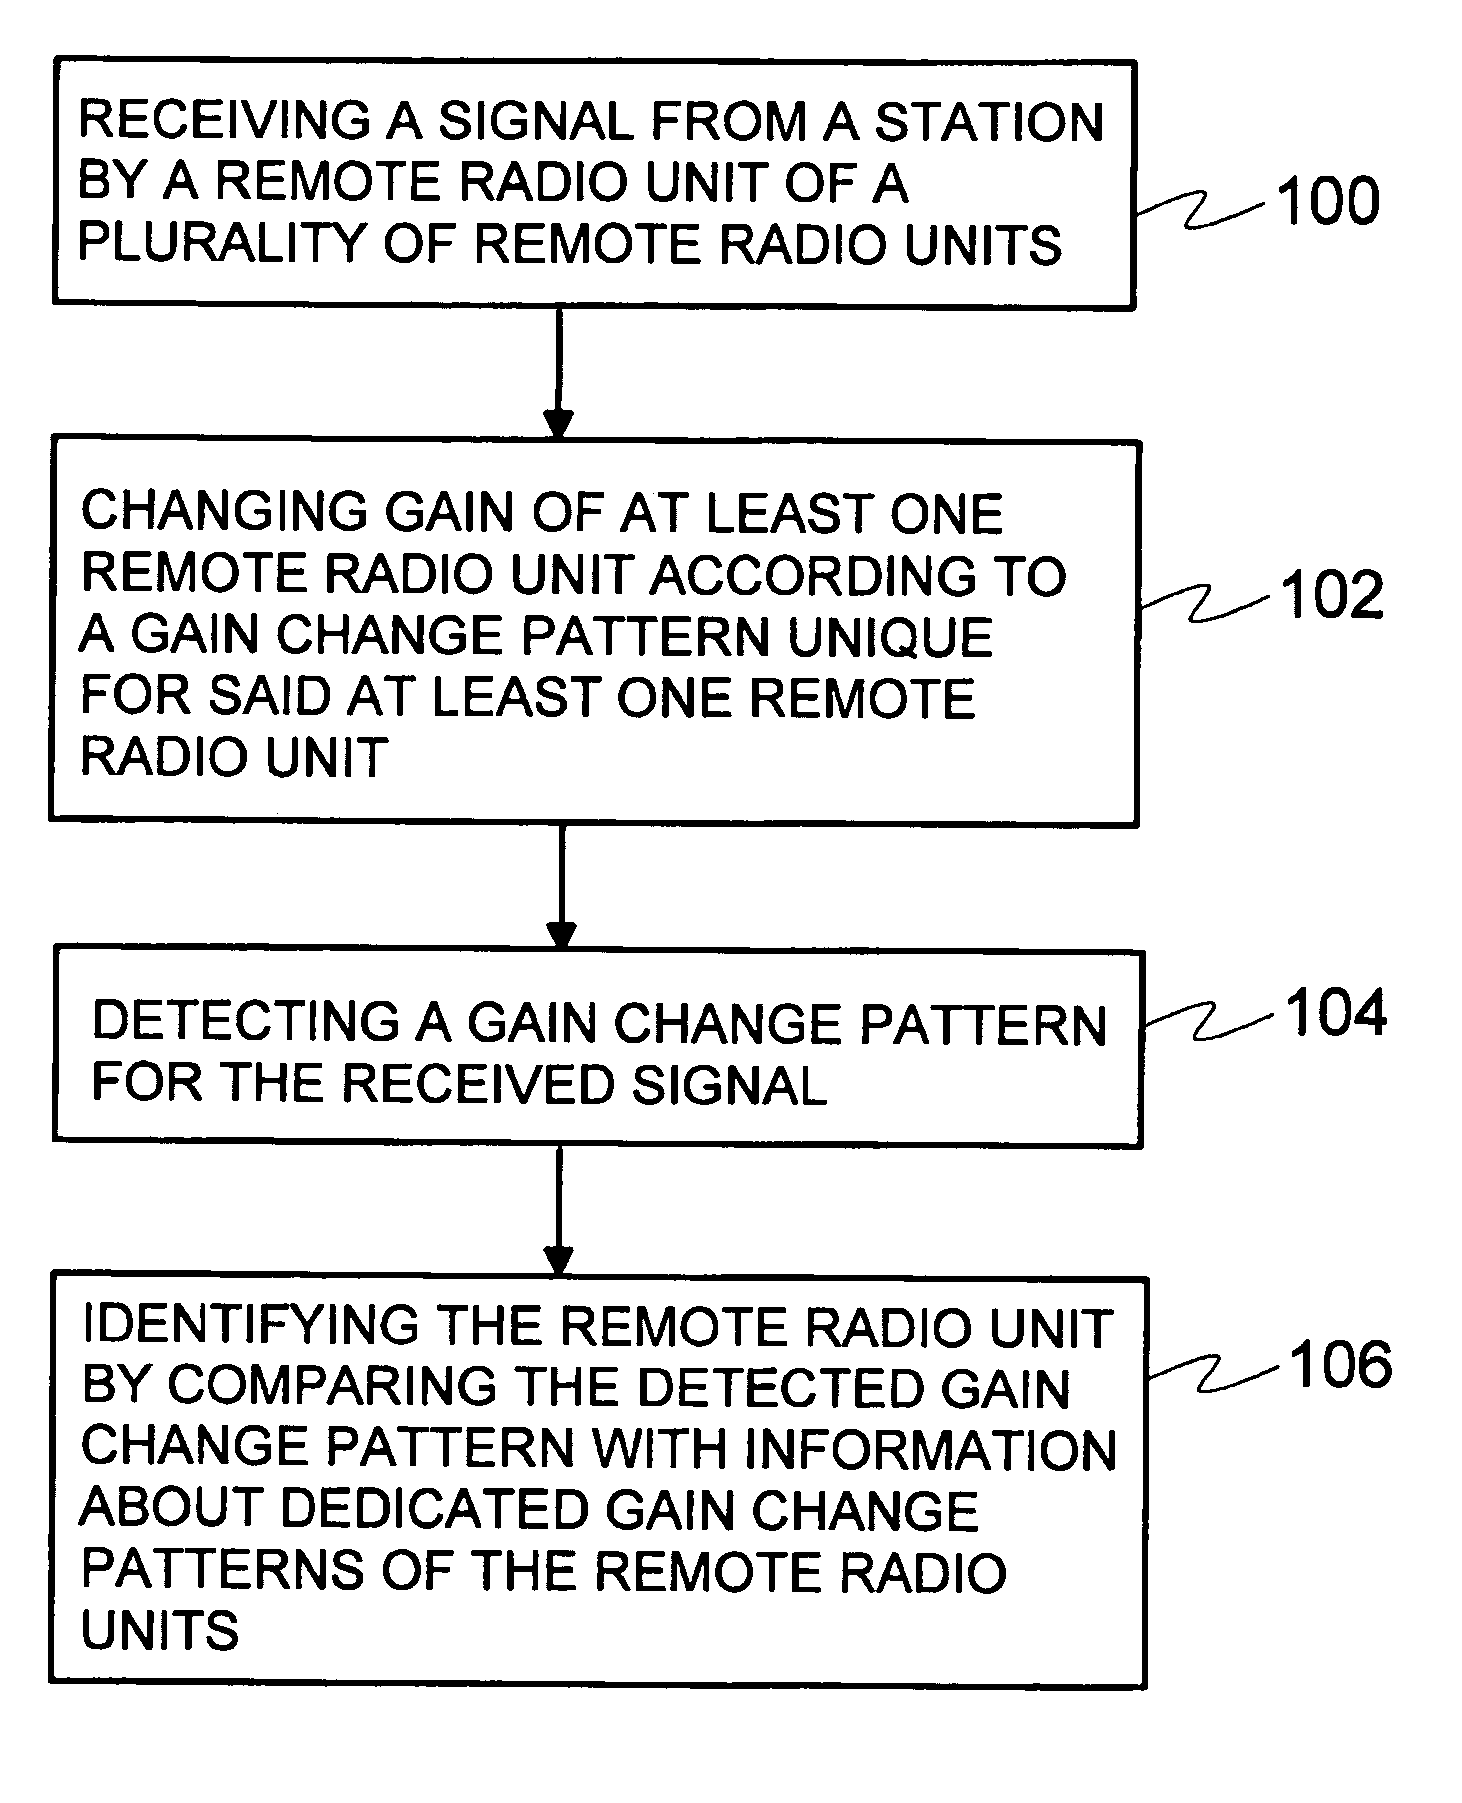 Identifying remote radio units in a communication system